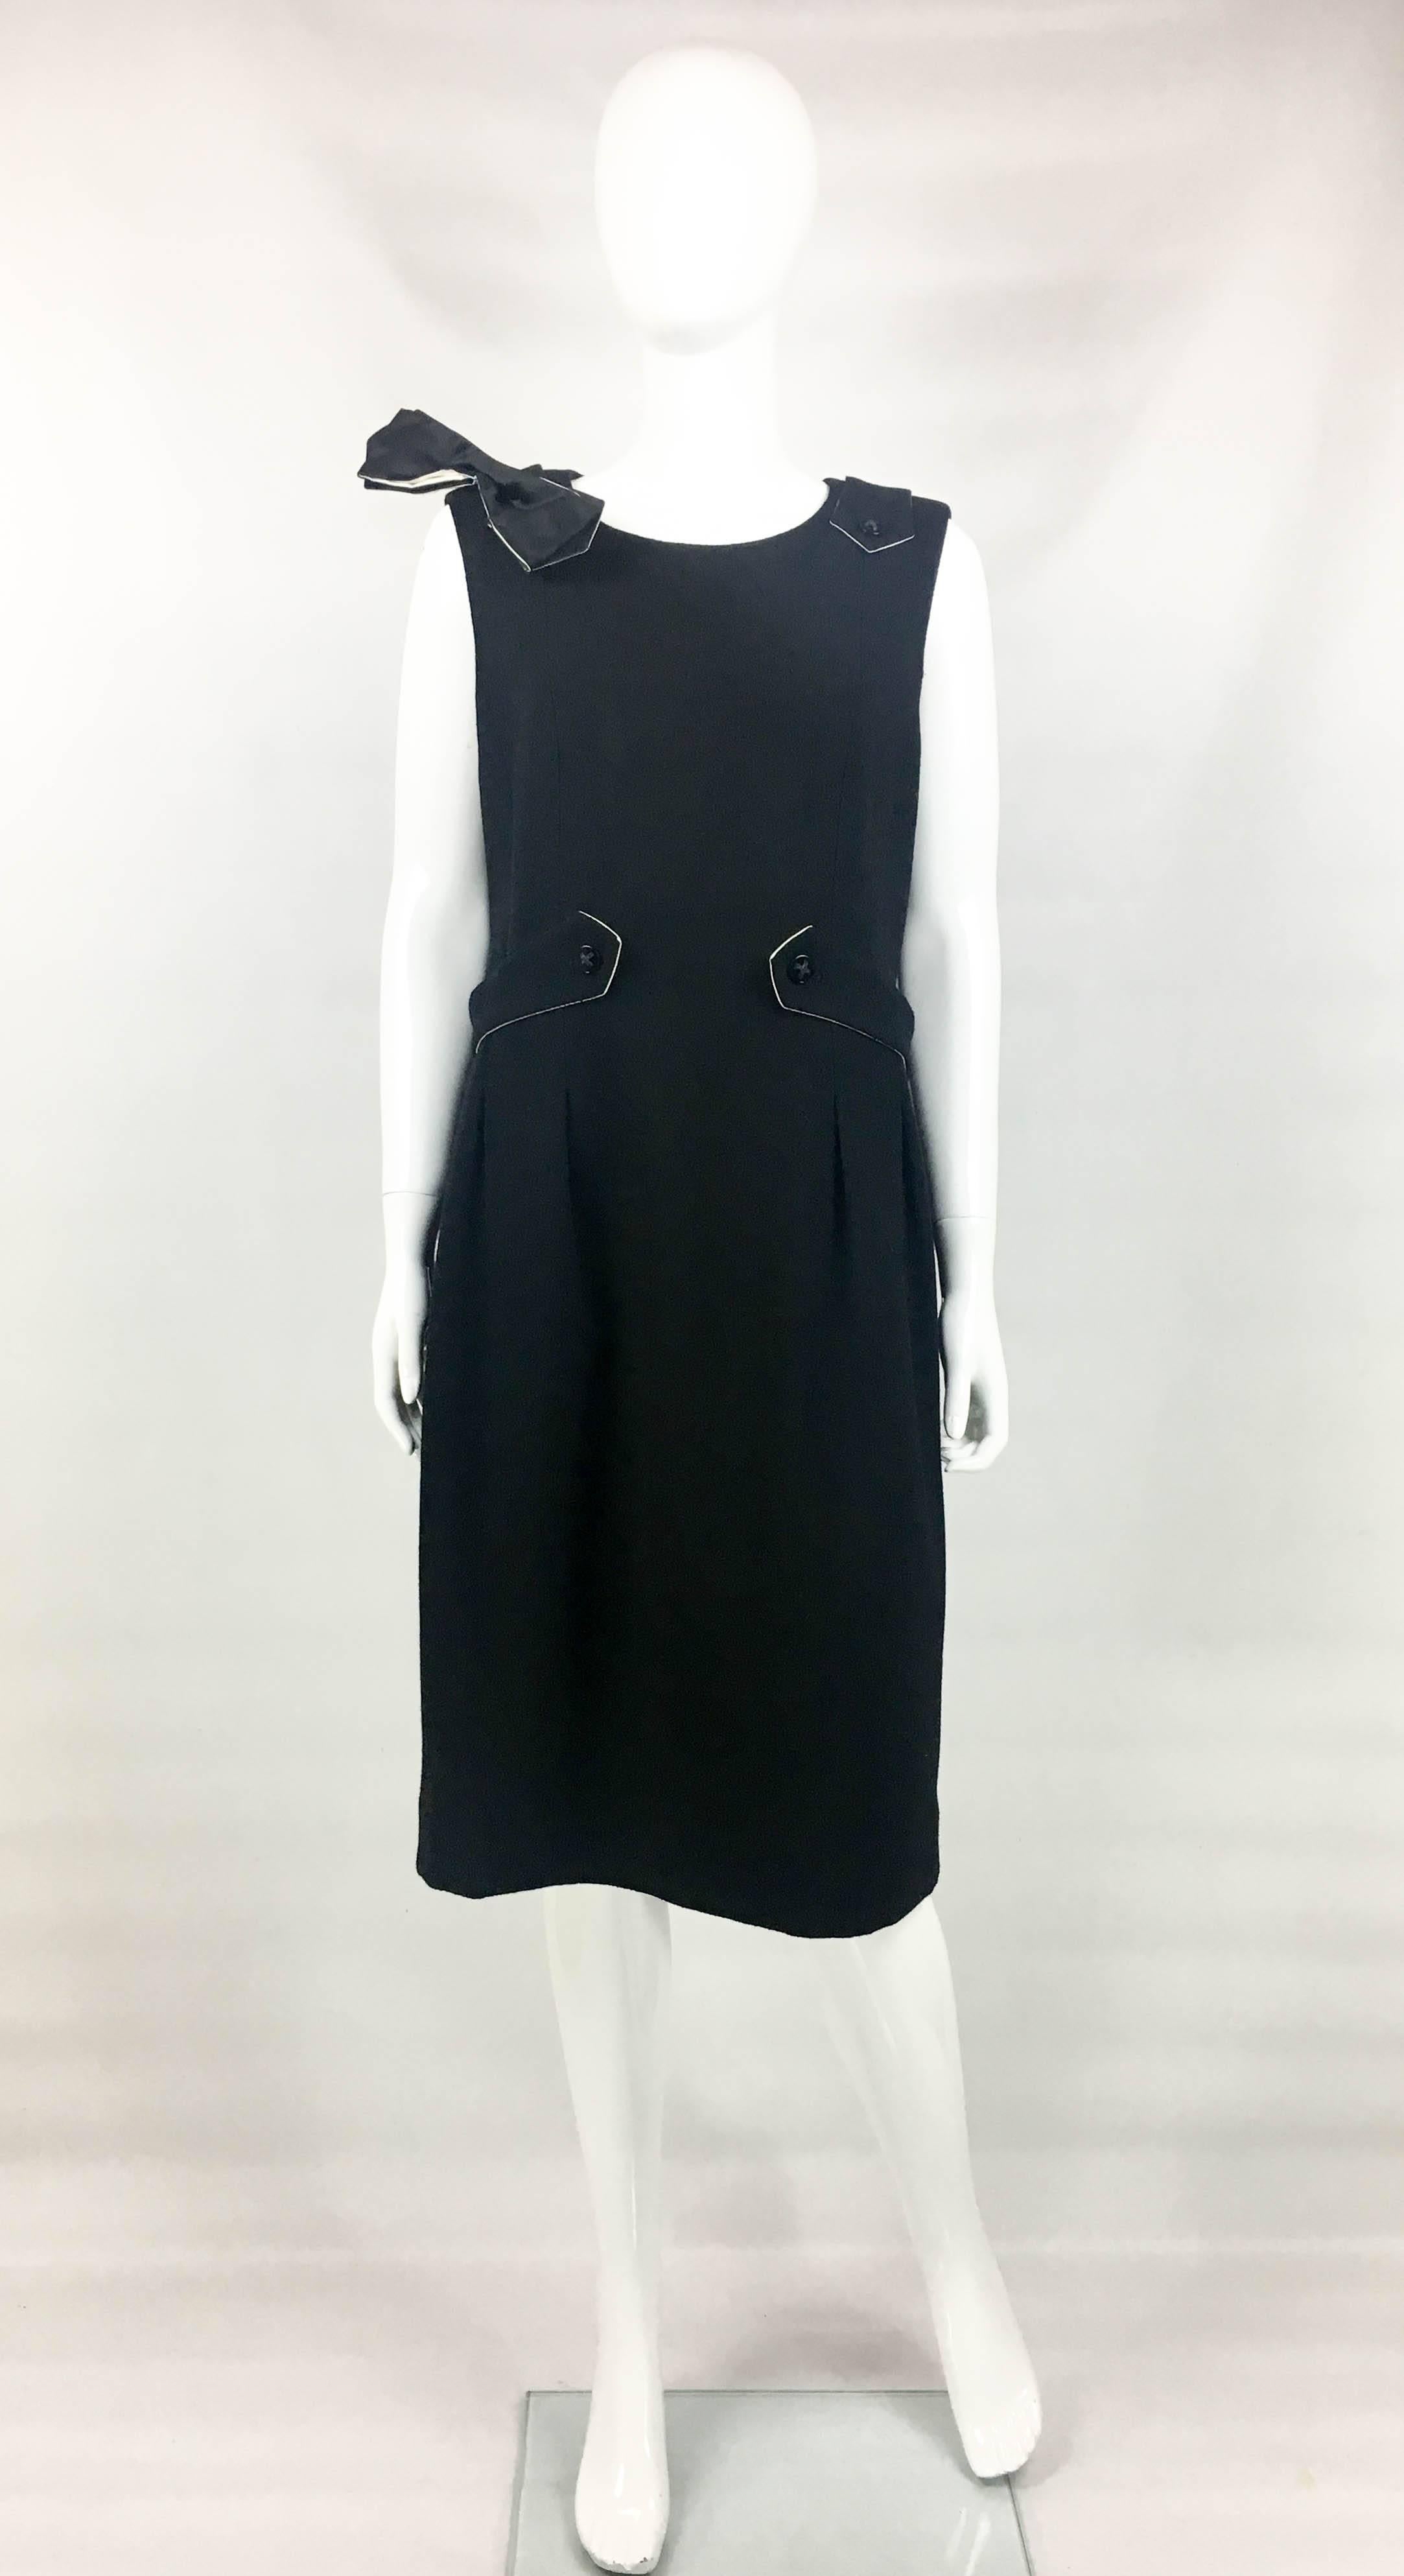 Chanel Runway Look Black Dress With Buttoned Details and Bow, 2006  In Excellent Condition For Sale In London, Chelsea